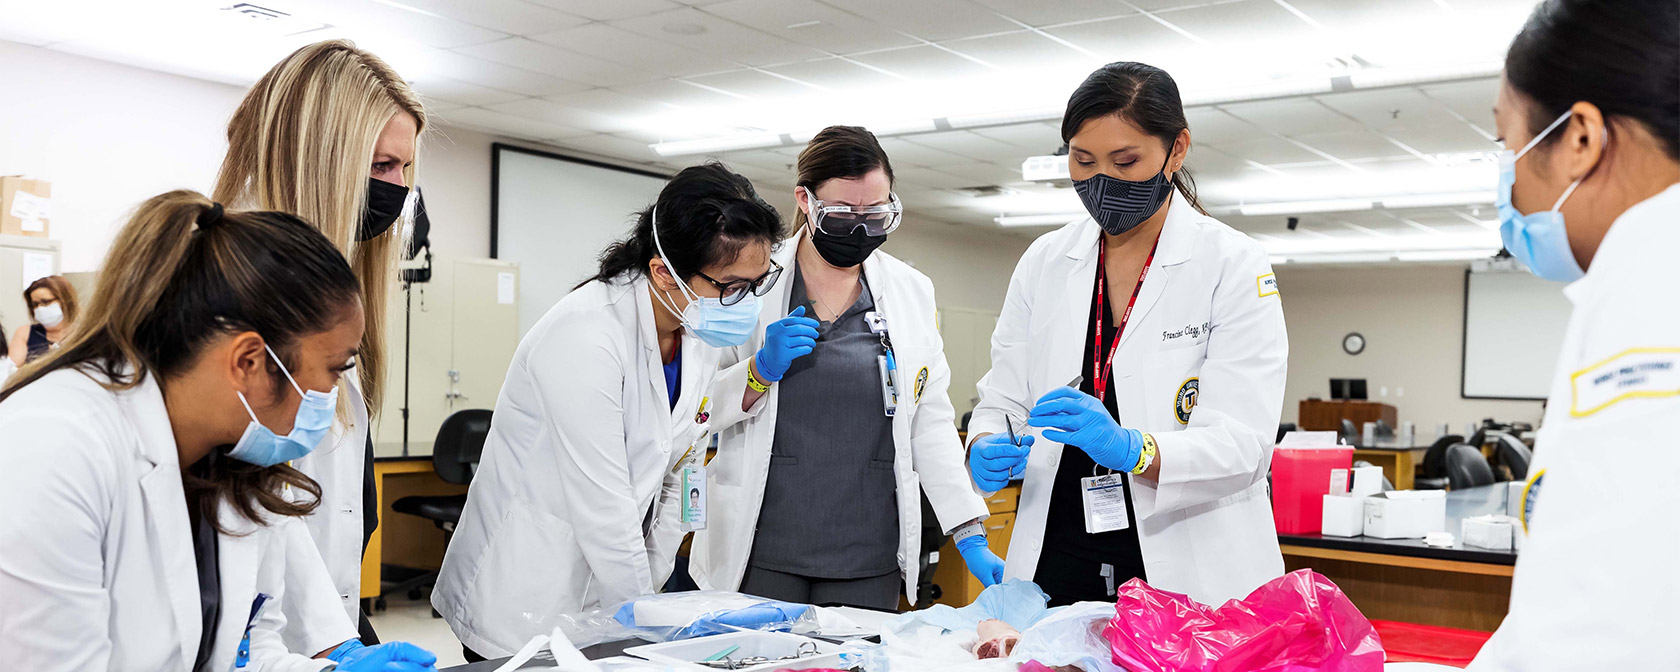 Touro School of Nursing students practice suturing in a classroom.